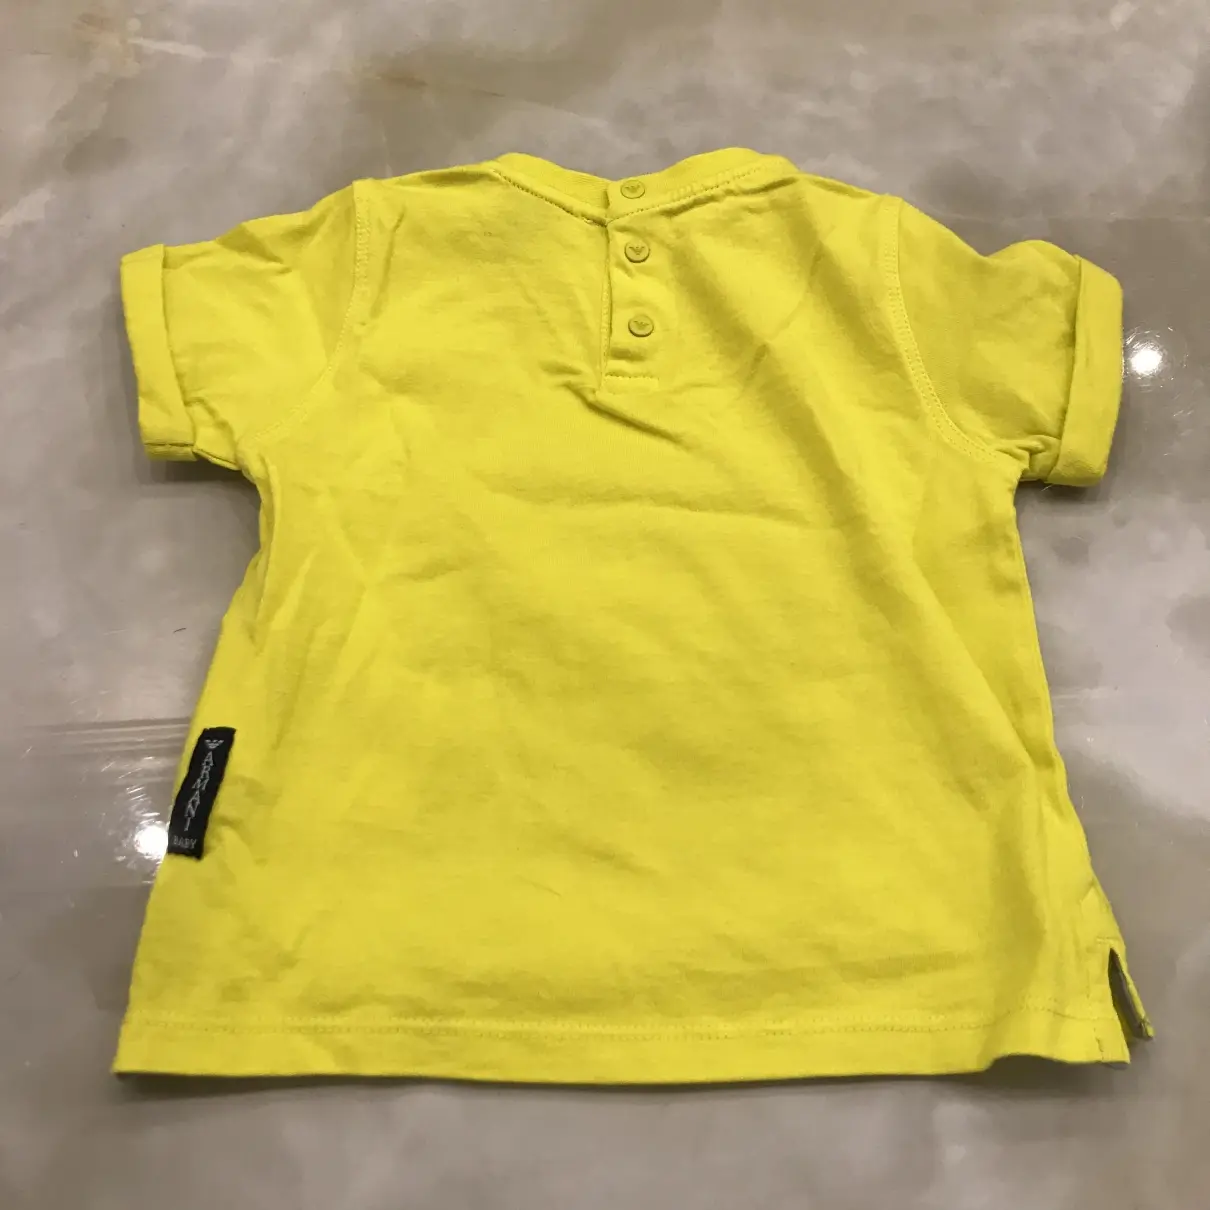 Armani Baby Top for sale